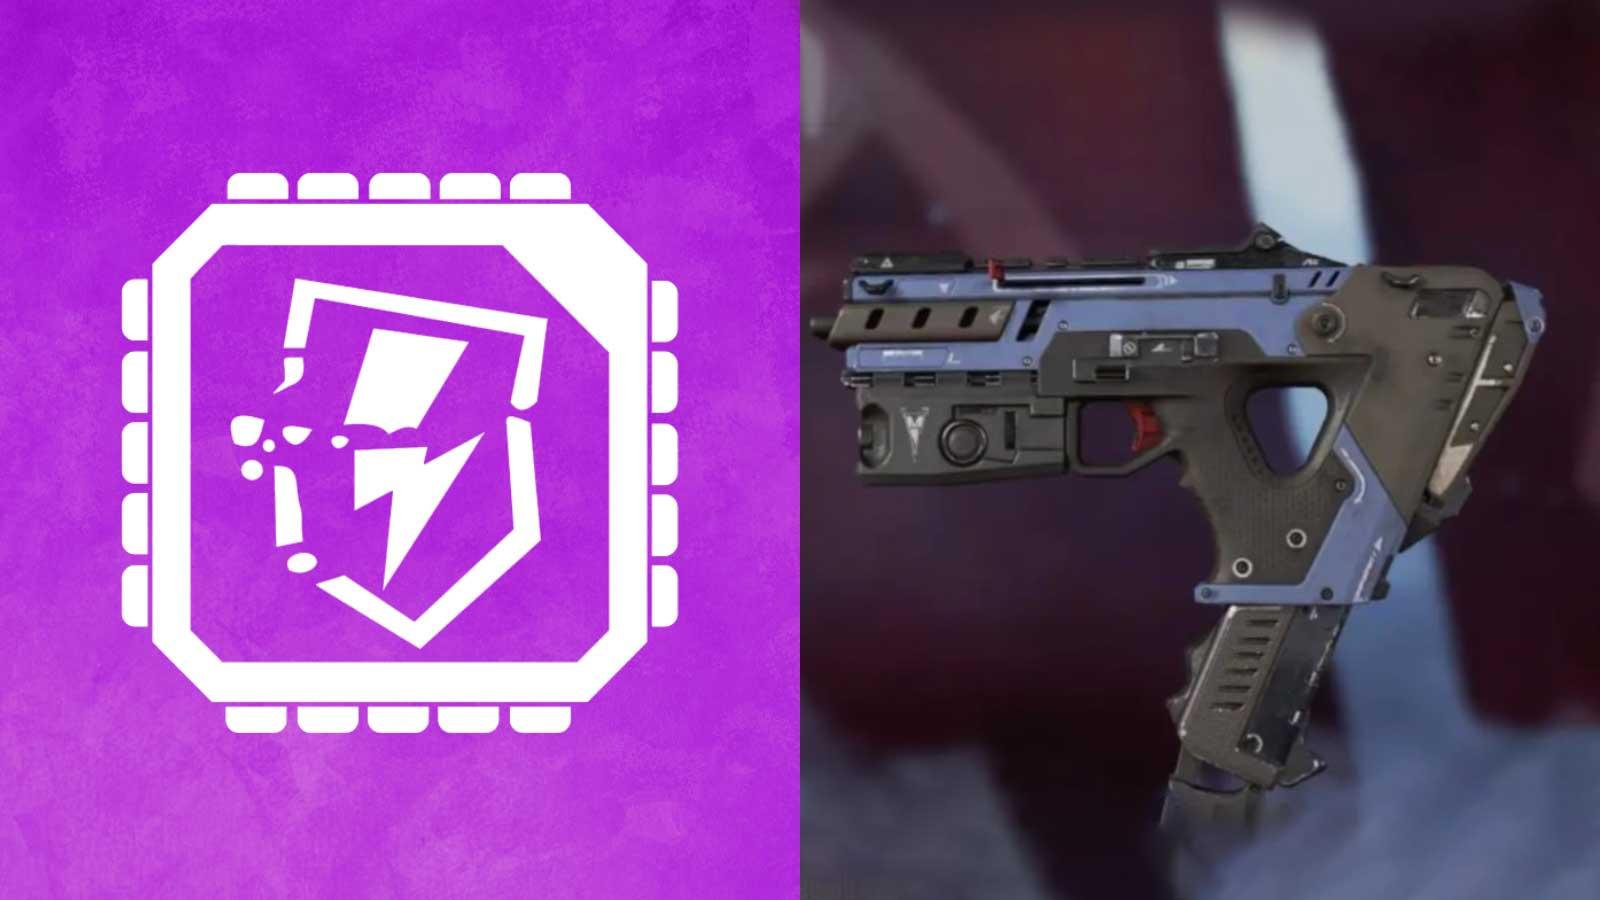 Apex Legends Disruptor rounds and Alternator SMG weapon from the game.